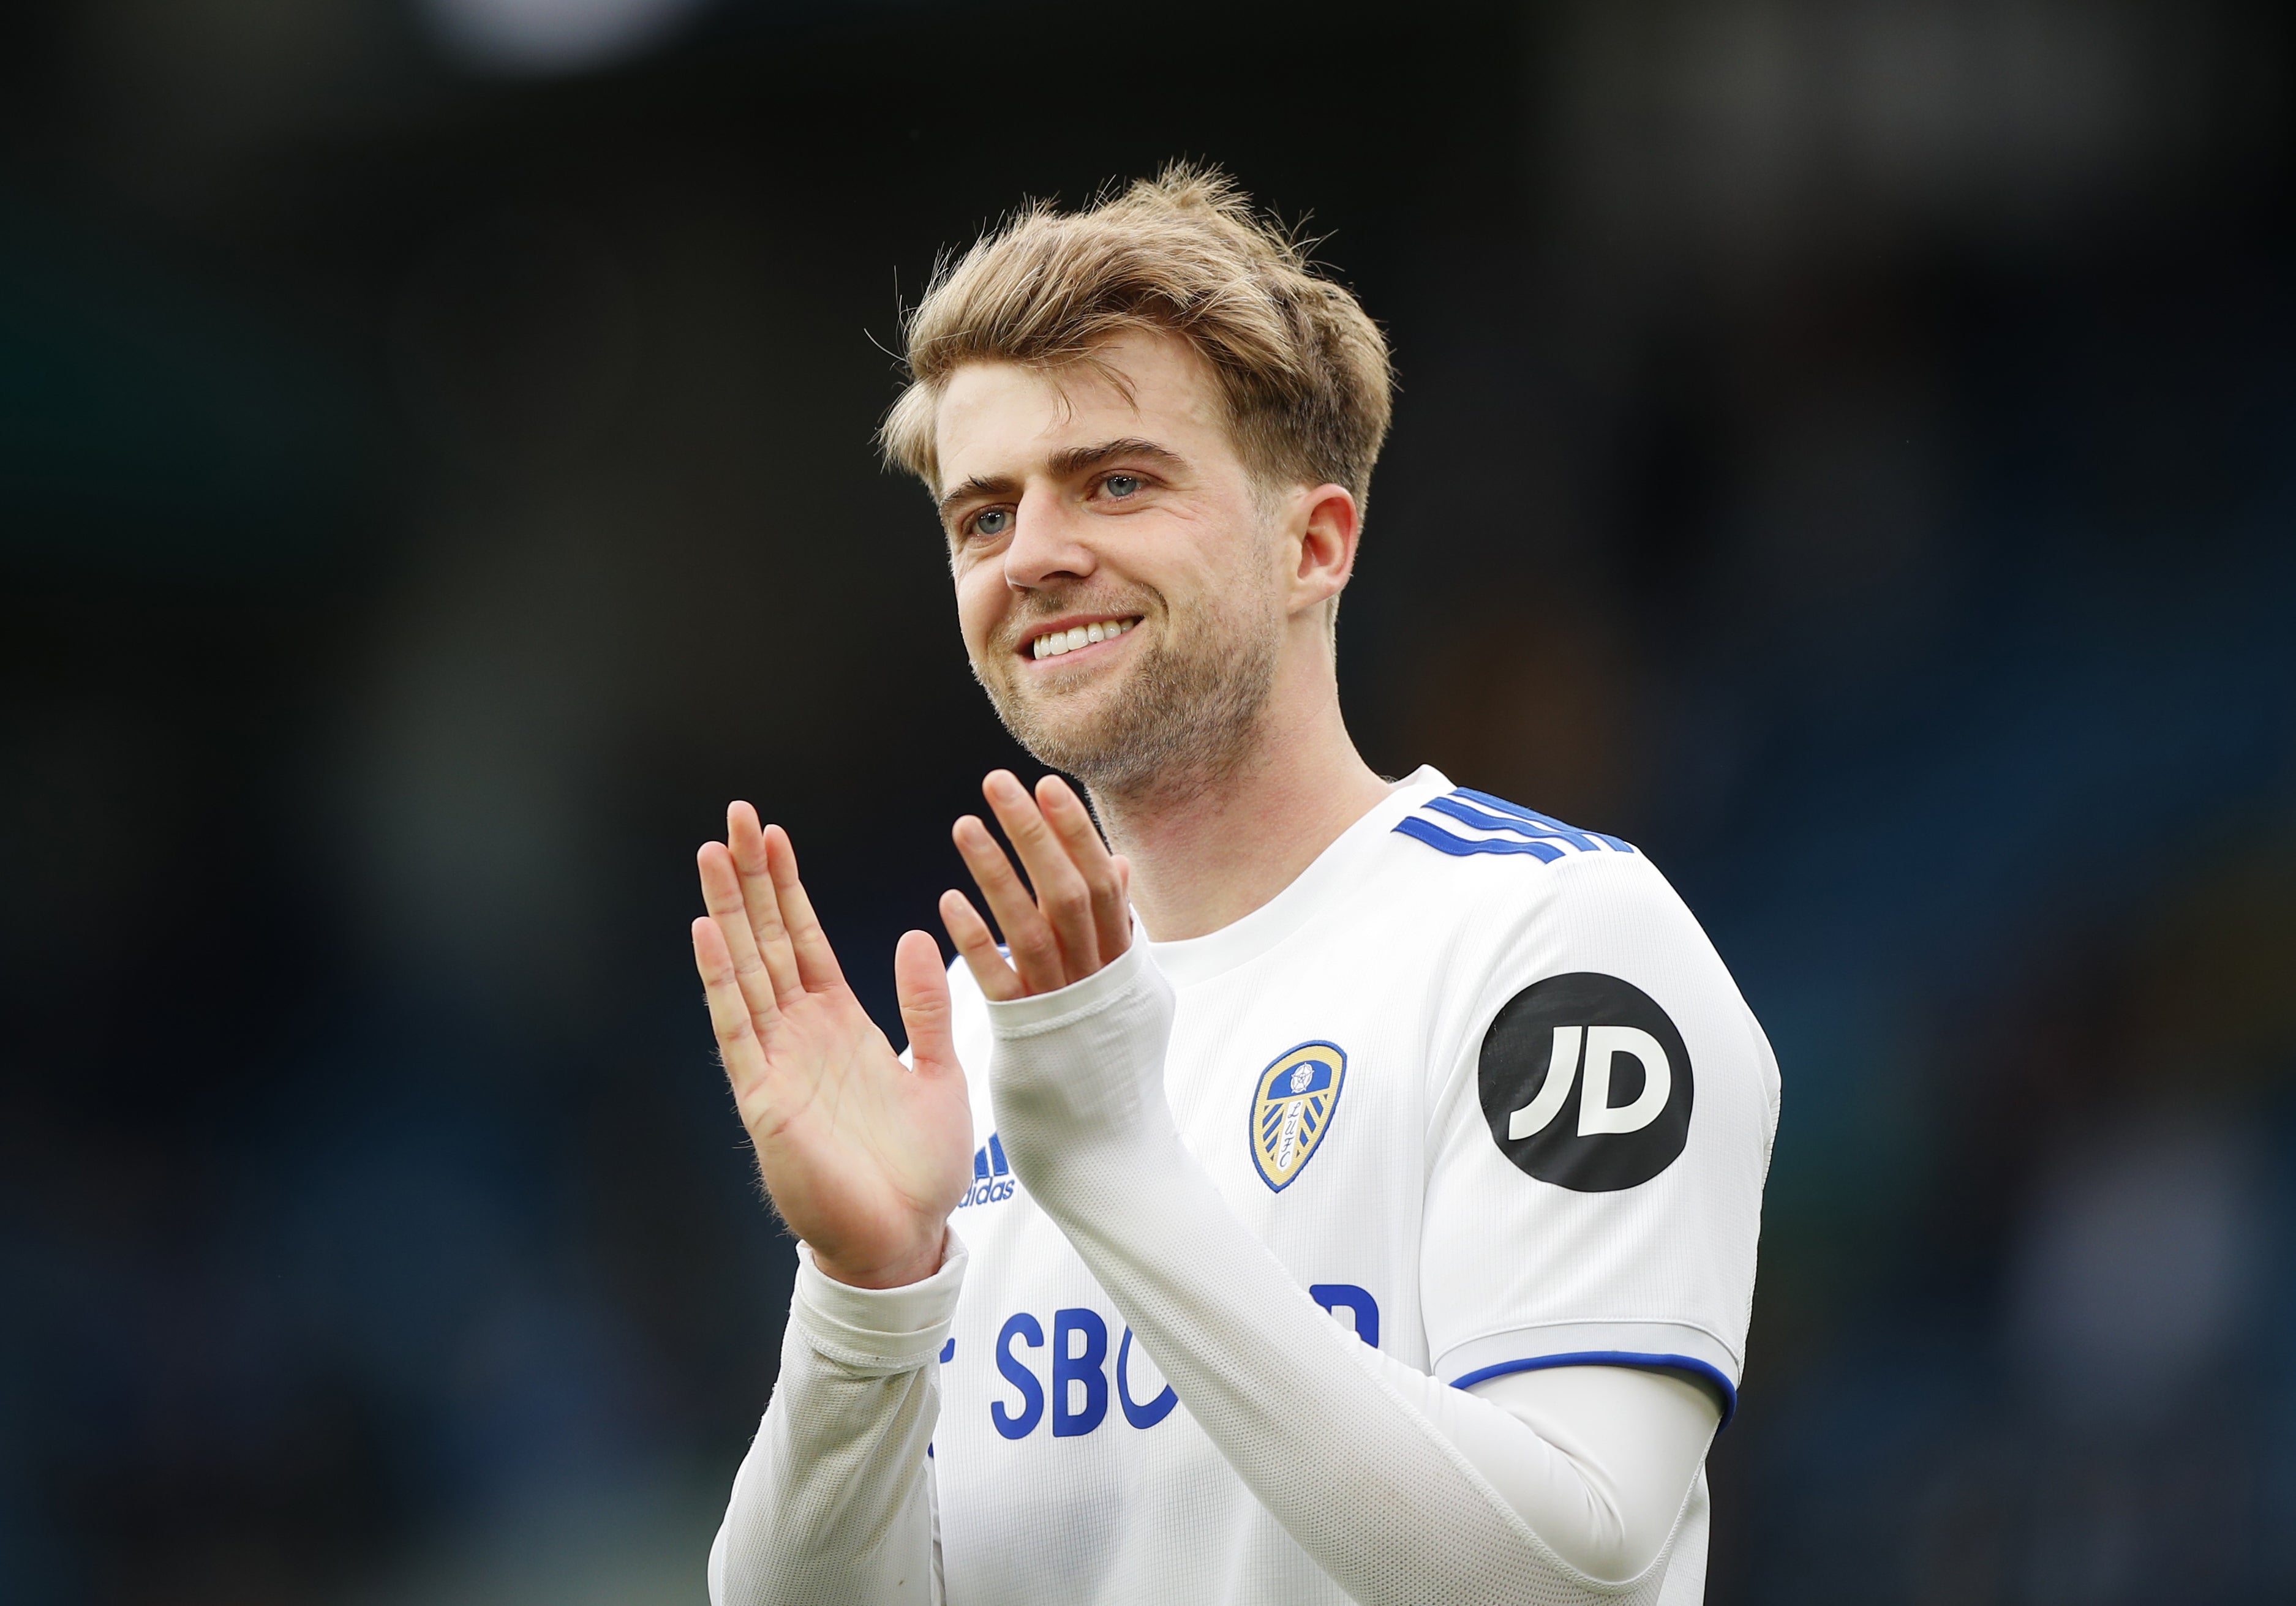 Leeds’ Patrick Bamford has received his first England call-up. (Lynne Cameron/PA)